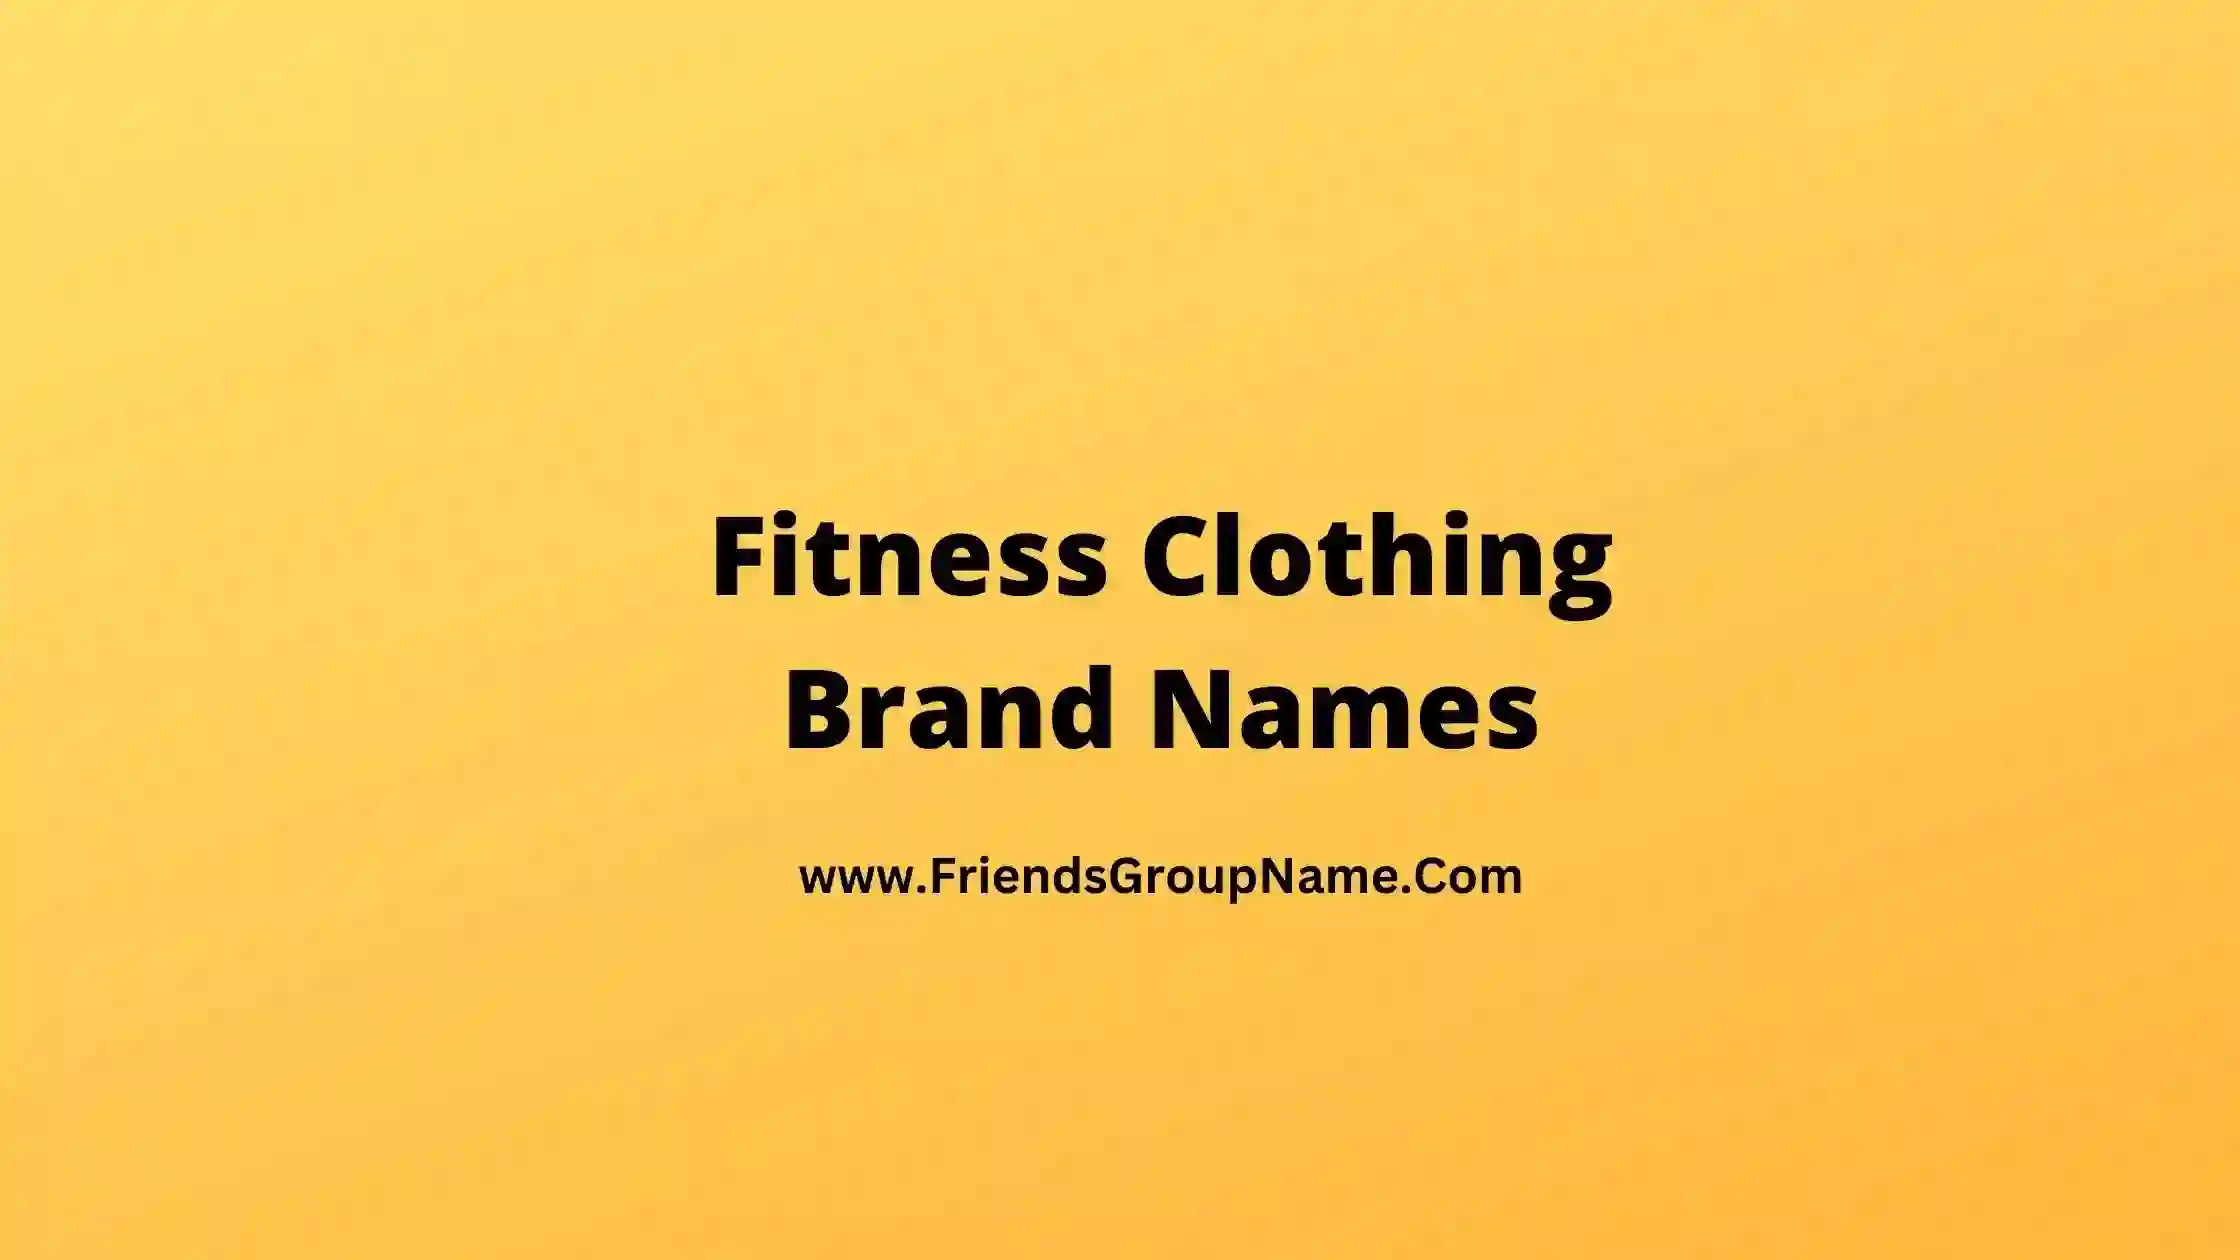 Fitness Clothing Brand Names